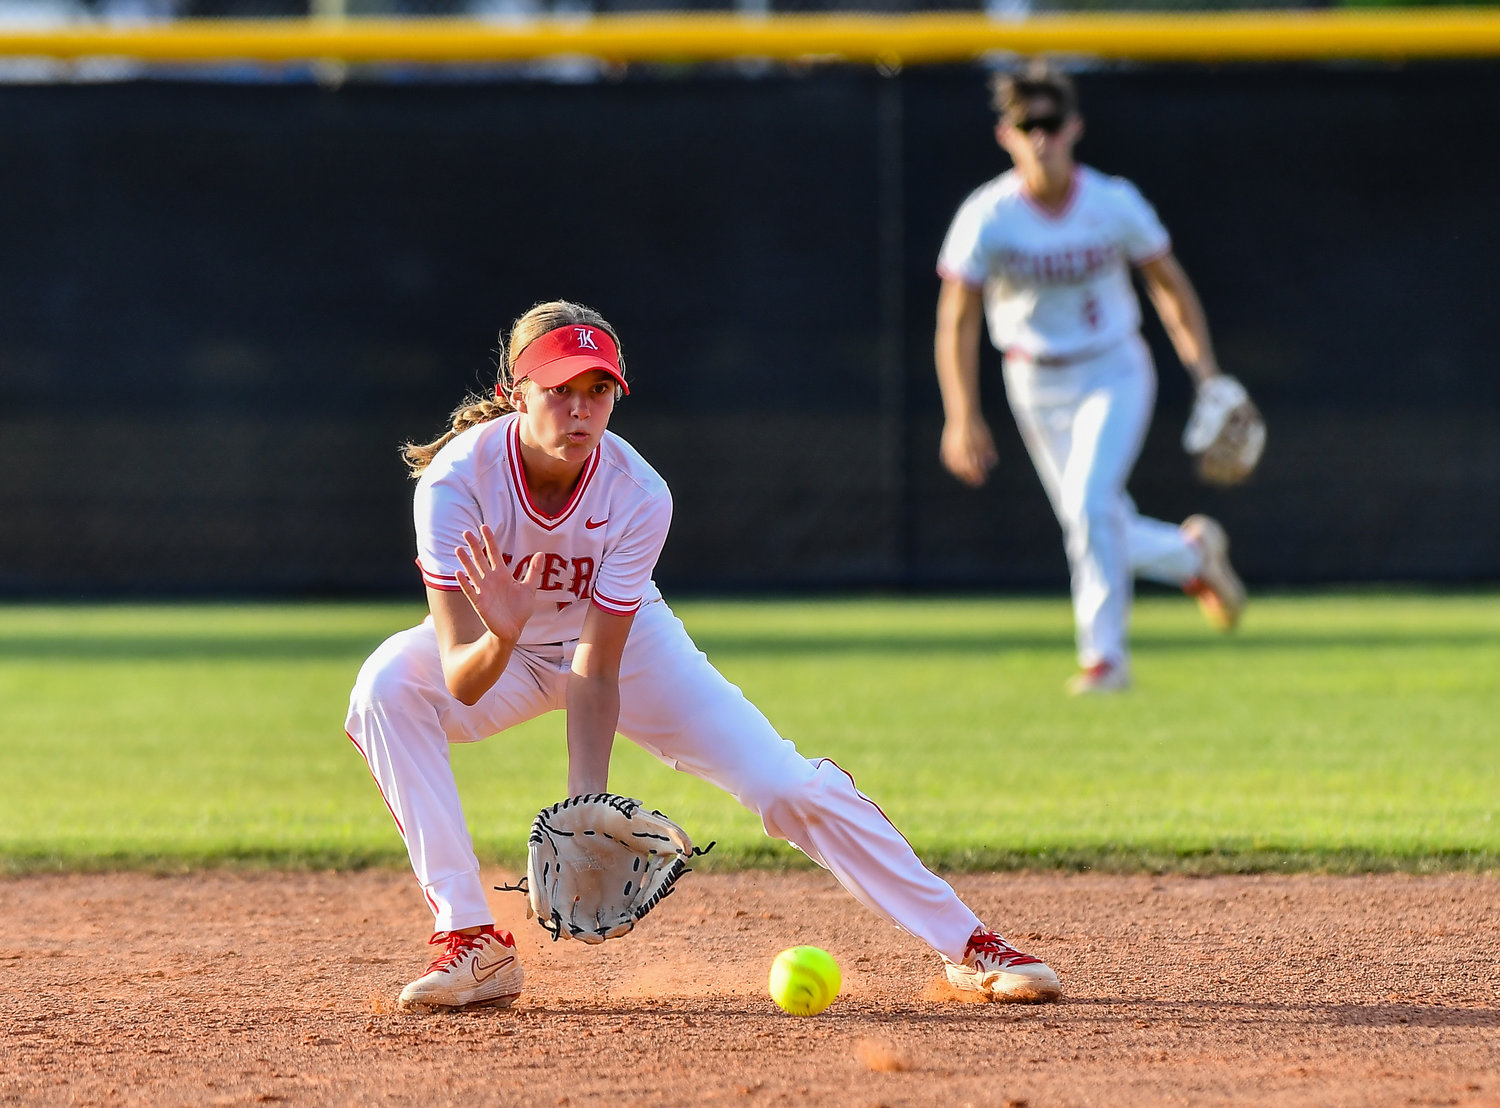 May 13, 2022: Katy's Avery Porter #12 fields a ground ball during the Regional Quarterfinal playoff between Katy and Cinco Ranch at Katy HS. (Photo by Mark Goodman / Katy Times)